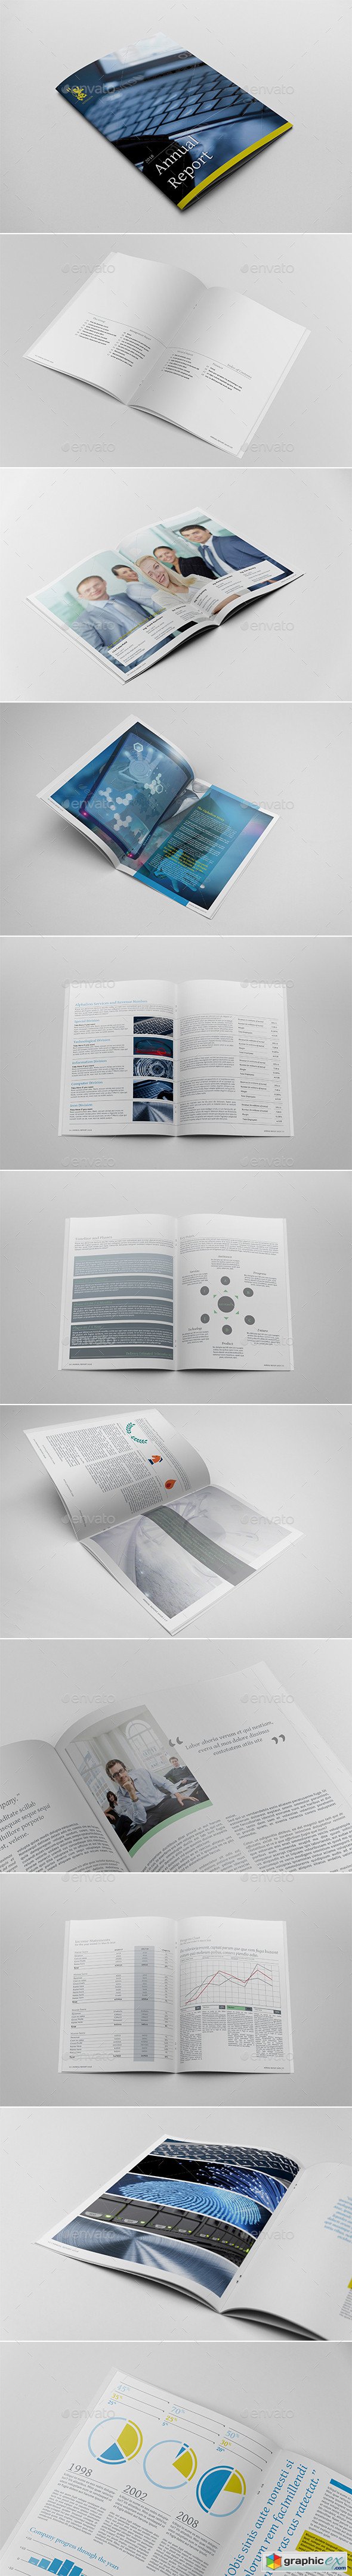 Annual Report Indesign Layout